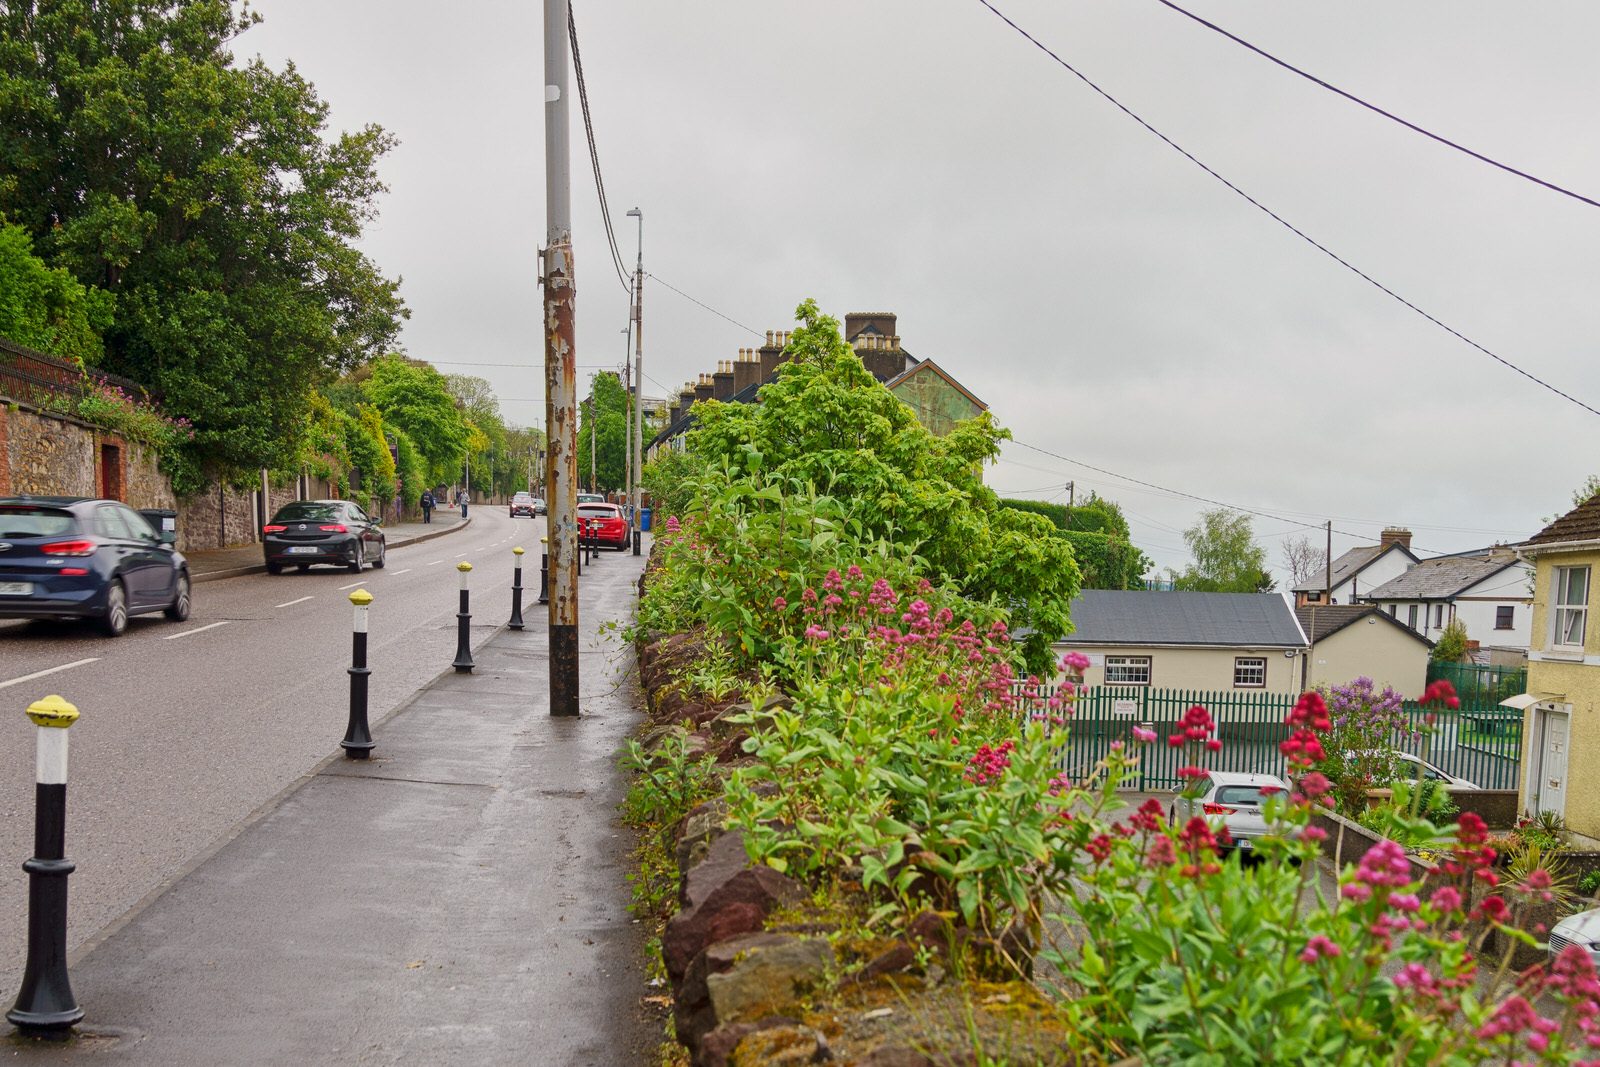 A WALK ALONG SUMMERHILL NORTH [IN CORK EVERYWHERE IS UPHILL OR DOWNHILL]-225786-1